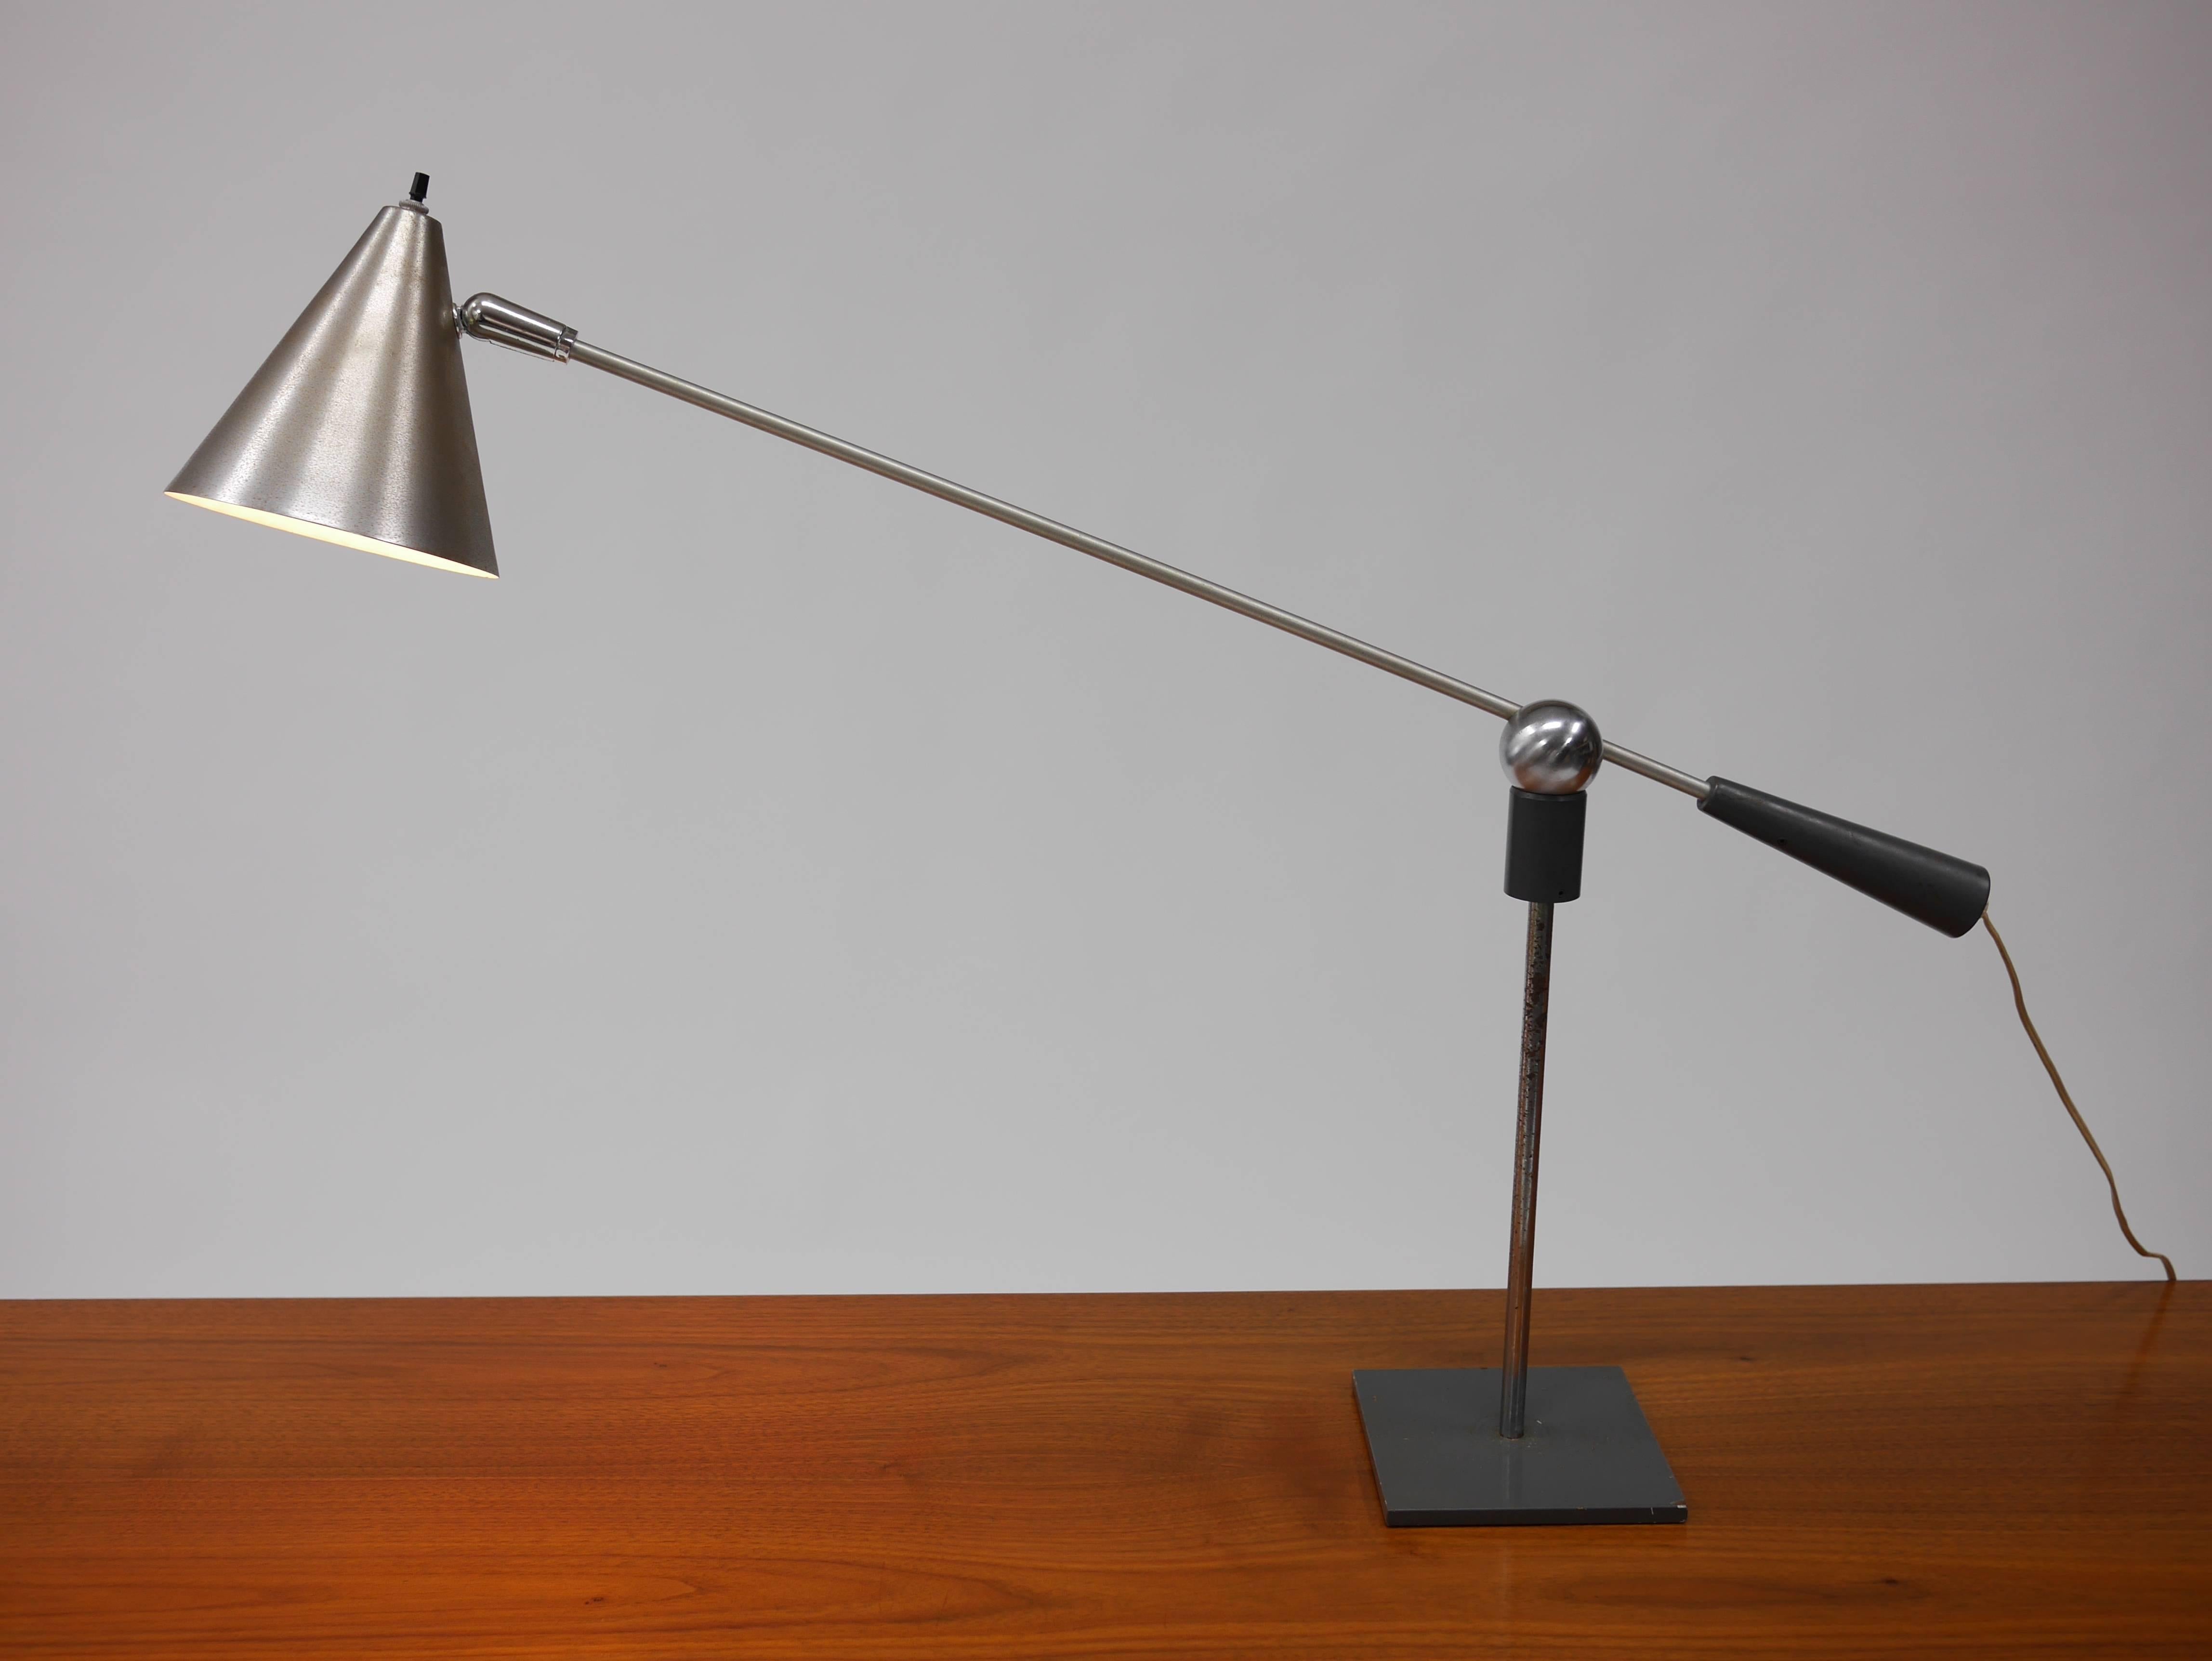 MoMA lamp by Gilbert Watrous for Heifetz. Nice, large, early example. Original patina.

The Watrous' lamp won a “Good Design” award for an intriguing low-cost light fixture featuring a pivot comprised of a magnetized steel ball residing